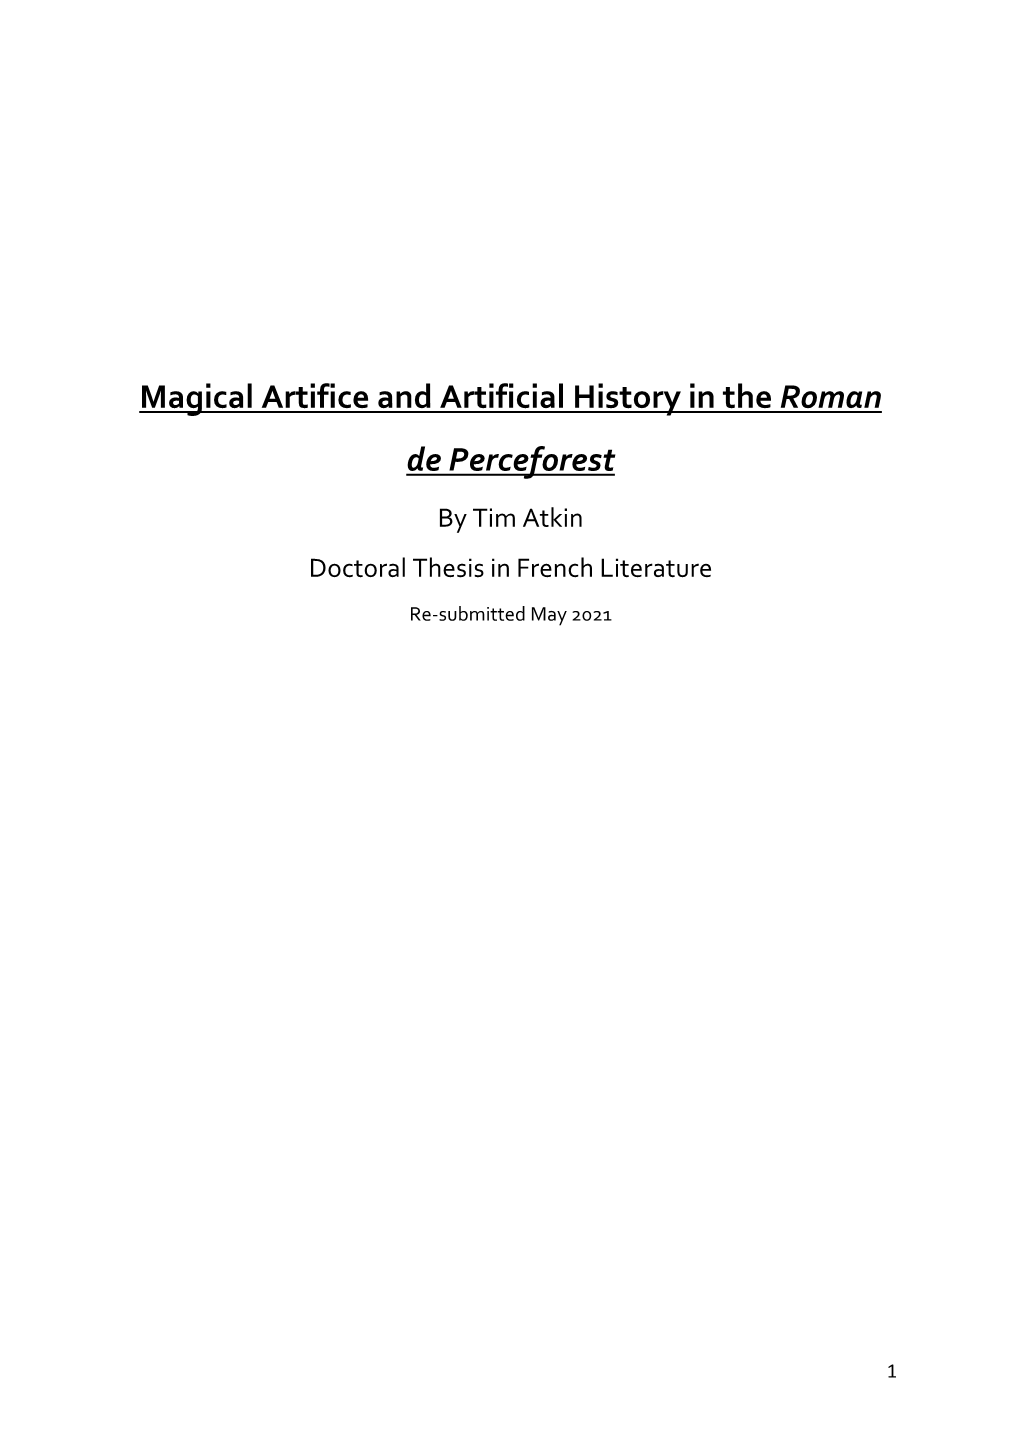 Magical Artifice and Artificial History in the Roman De Perceforest by Tim Atkin Doctoral Thesis in French Literature